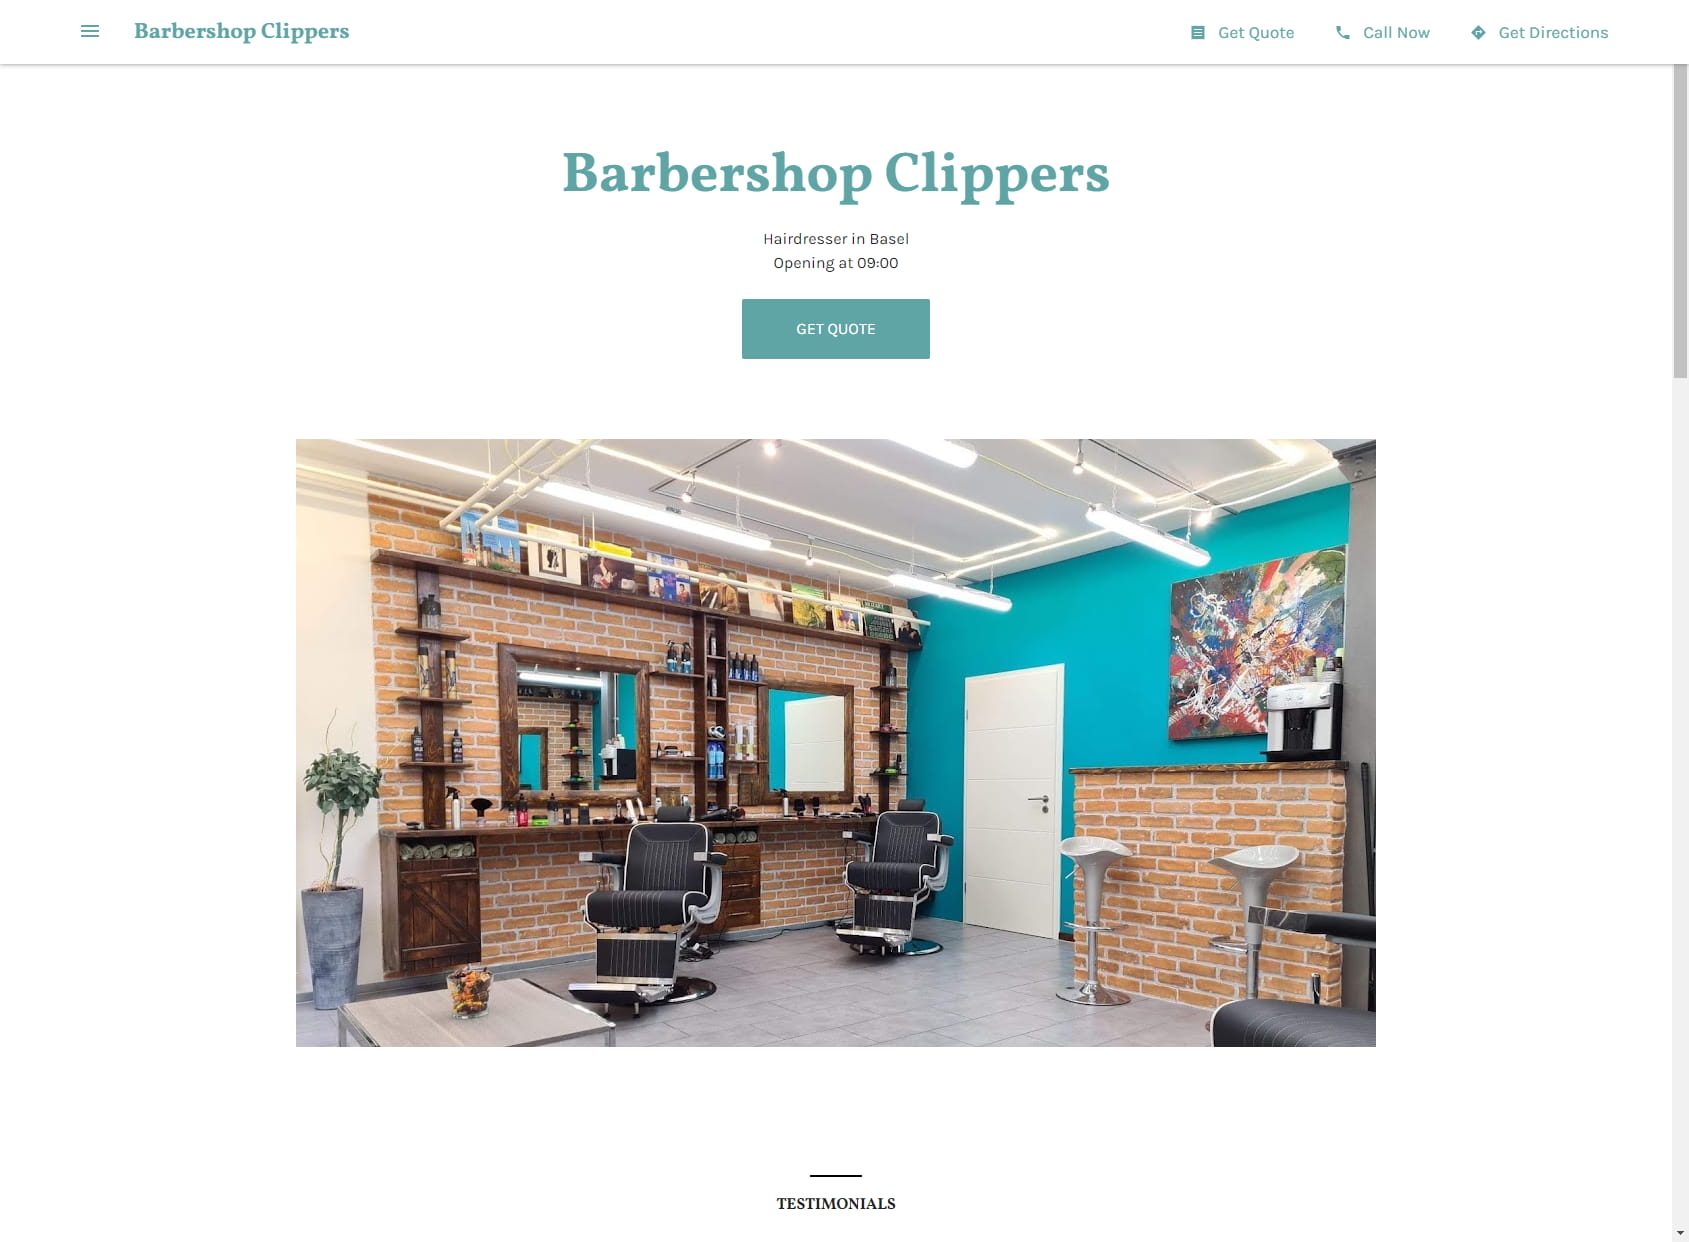 Barbershop Clippers